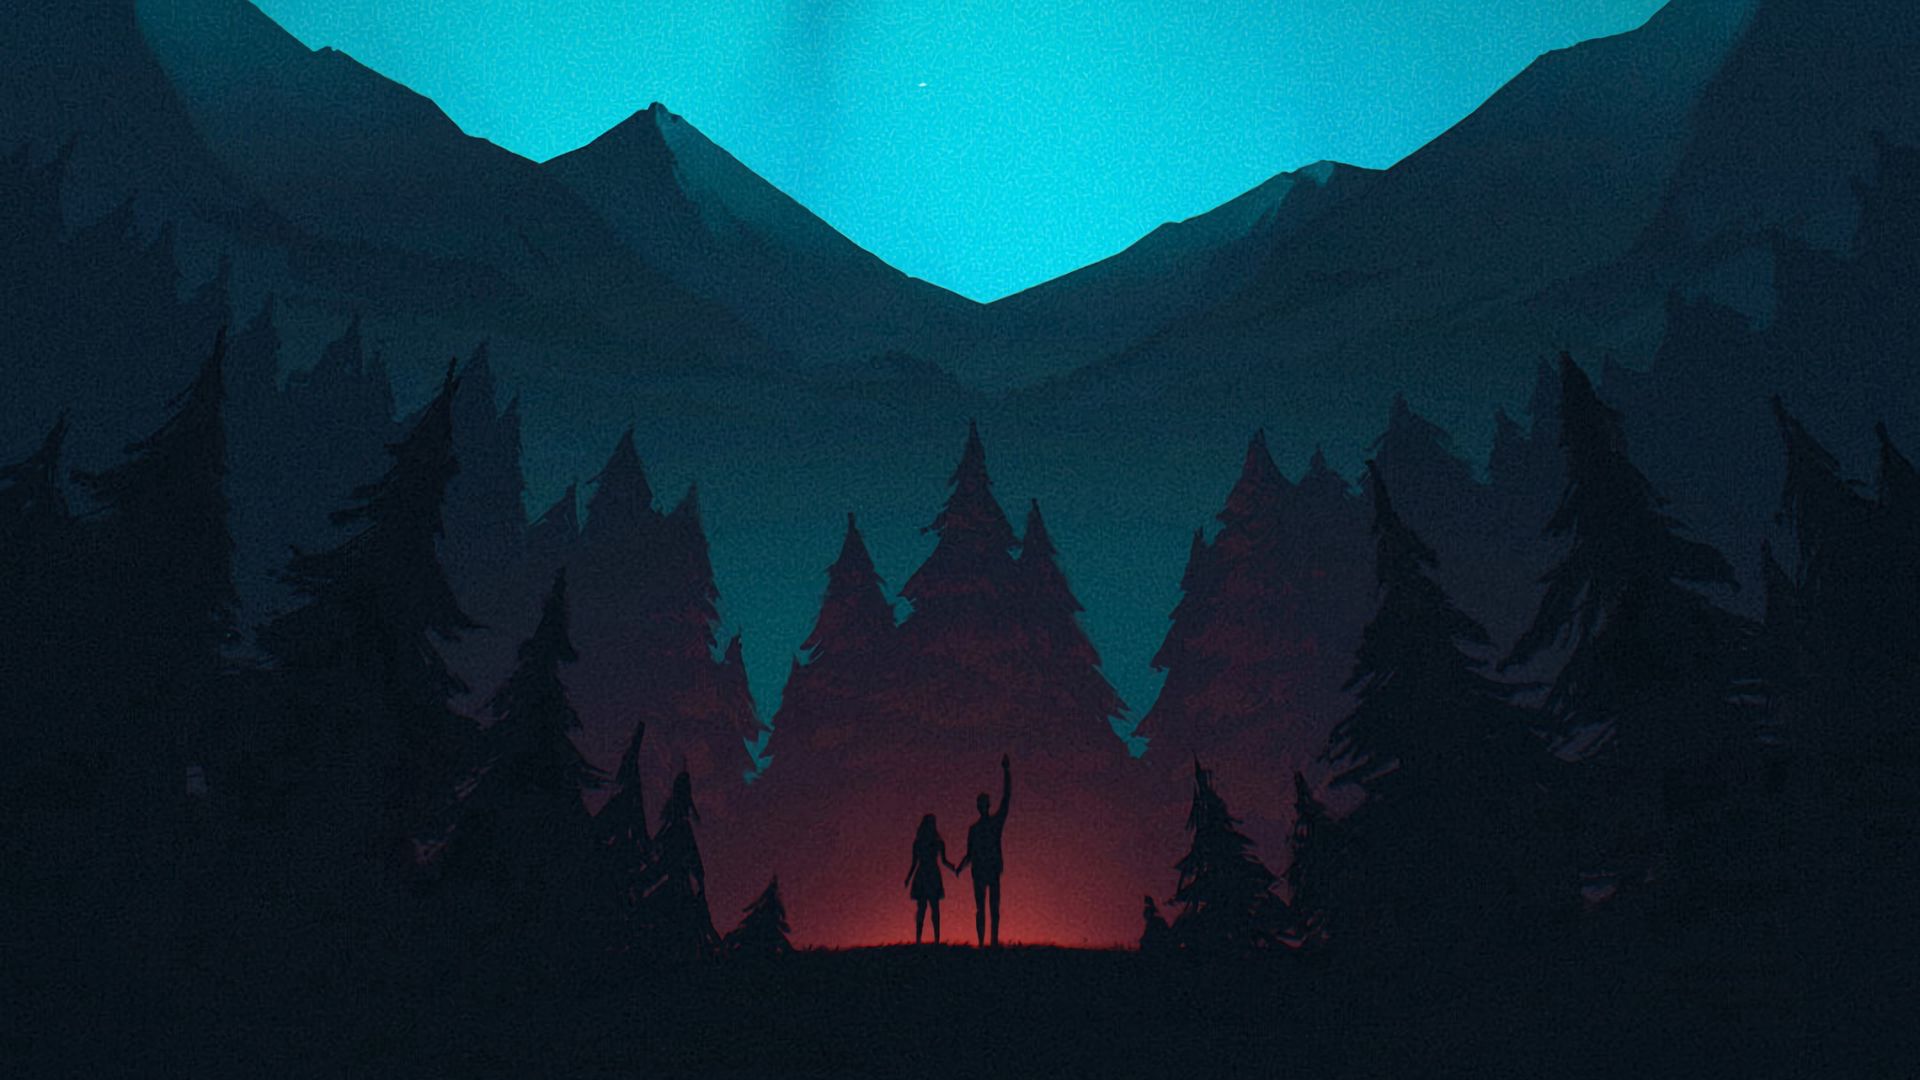 1920x1080 Wallpaper night, forest, mountains, starry sky, silhouettes, art